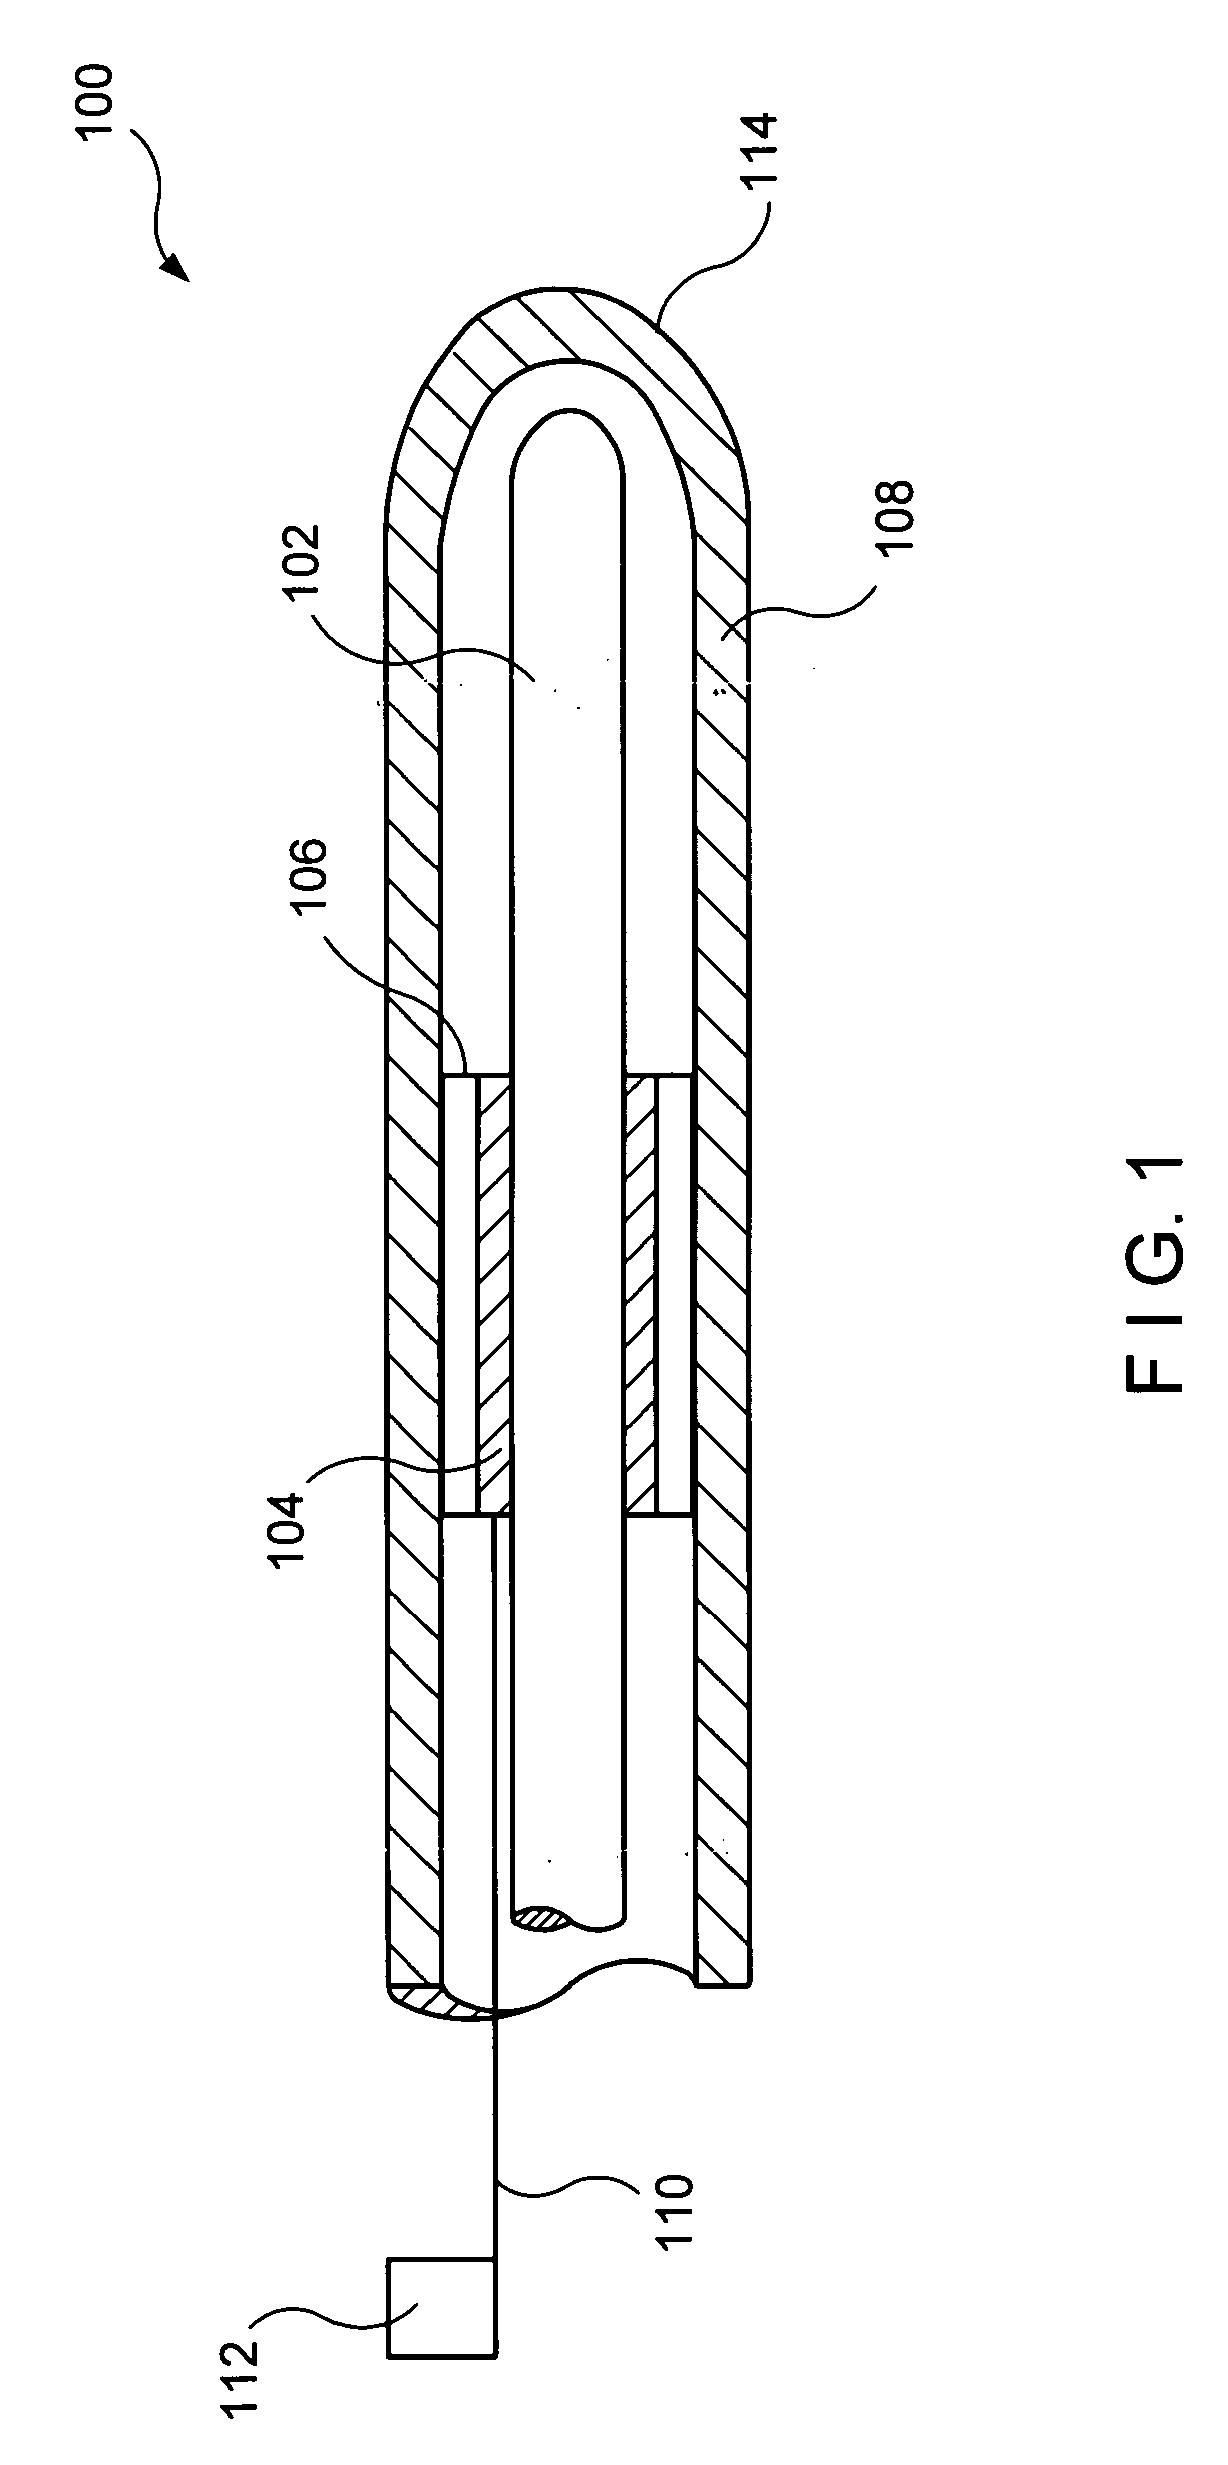 Cylindrical device for delivering energy to tissue